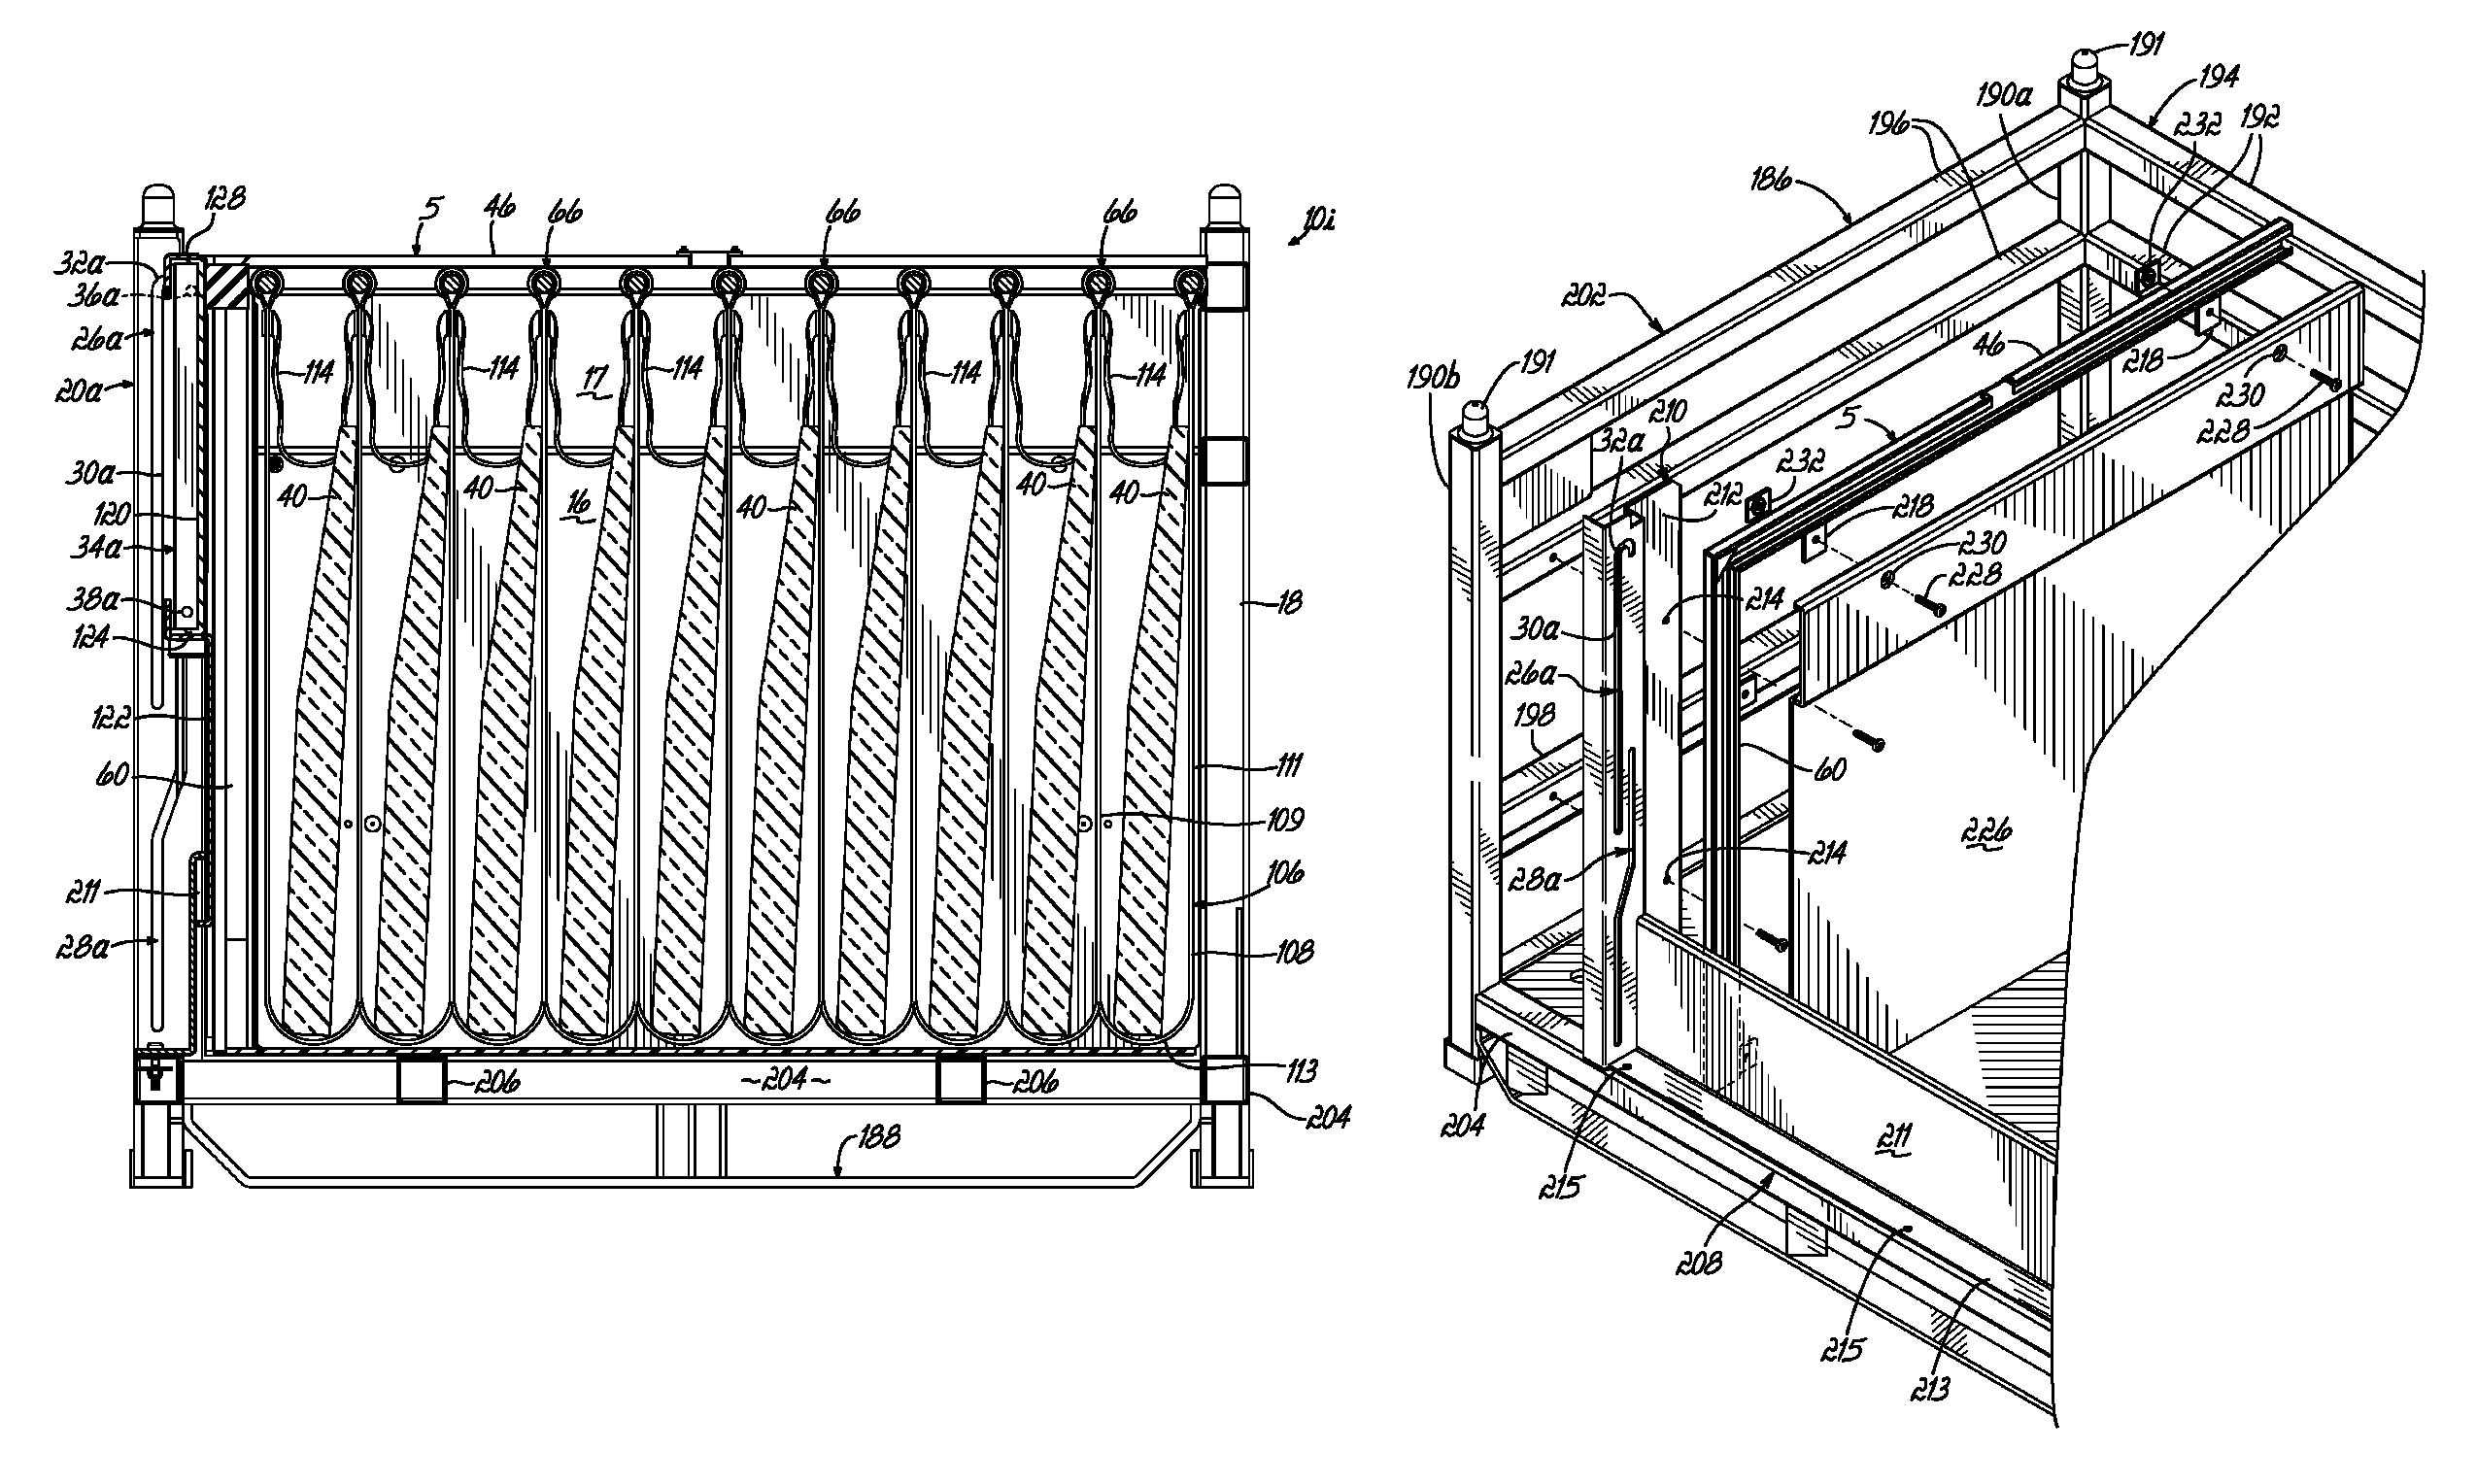 Container having metal outer frame for supporting L-shaped tracks